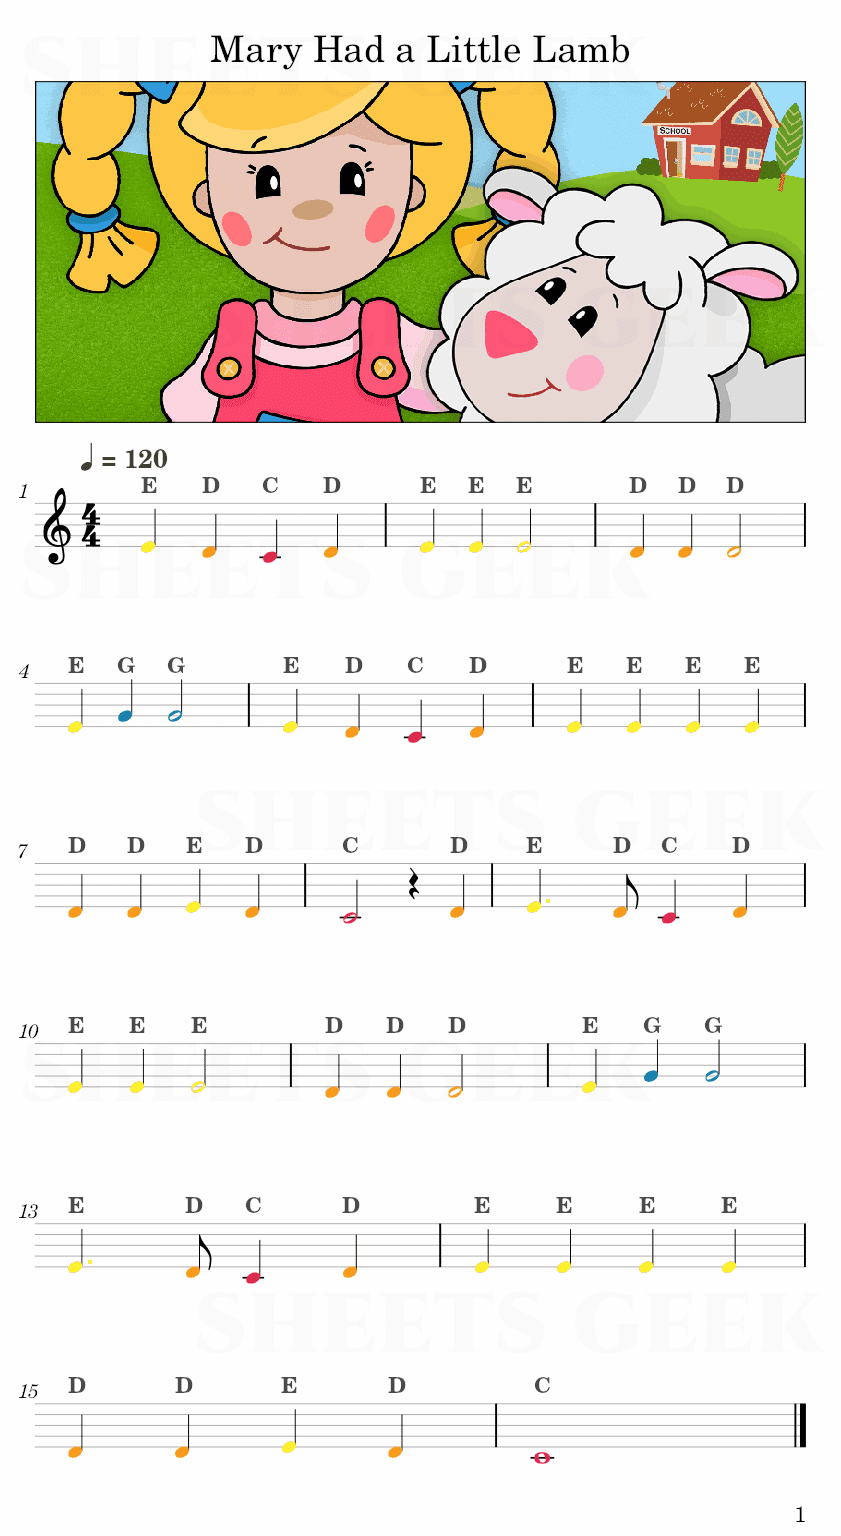 Mary Had a Little Lamb Easy Sheet Music Free for piano, keyboard, flute, violin, sax, cello page 1